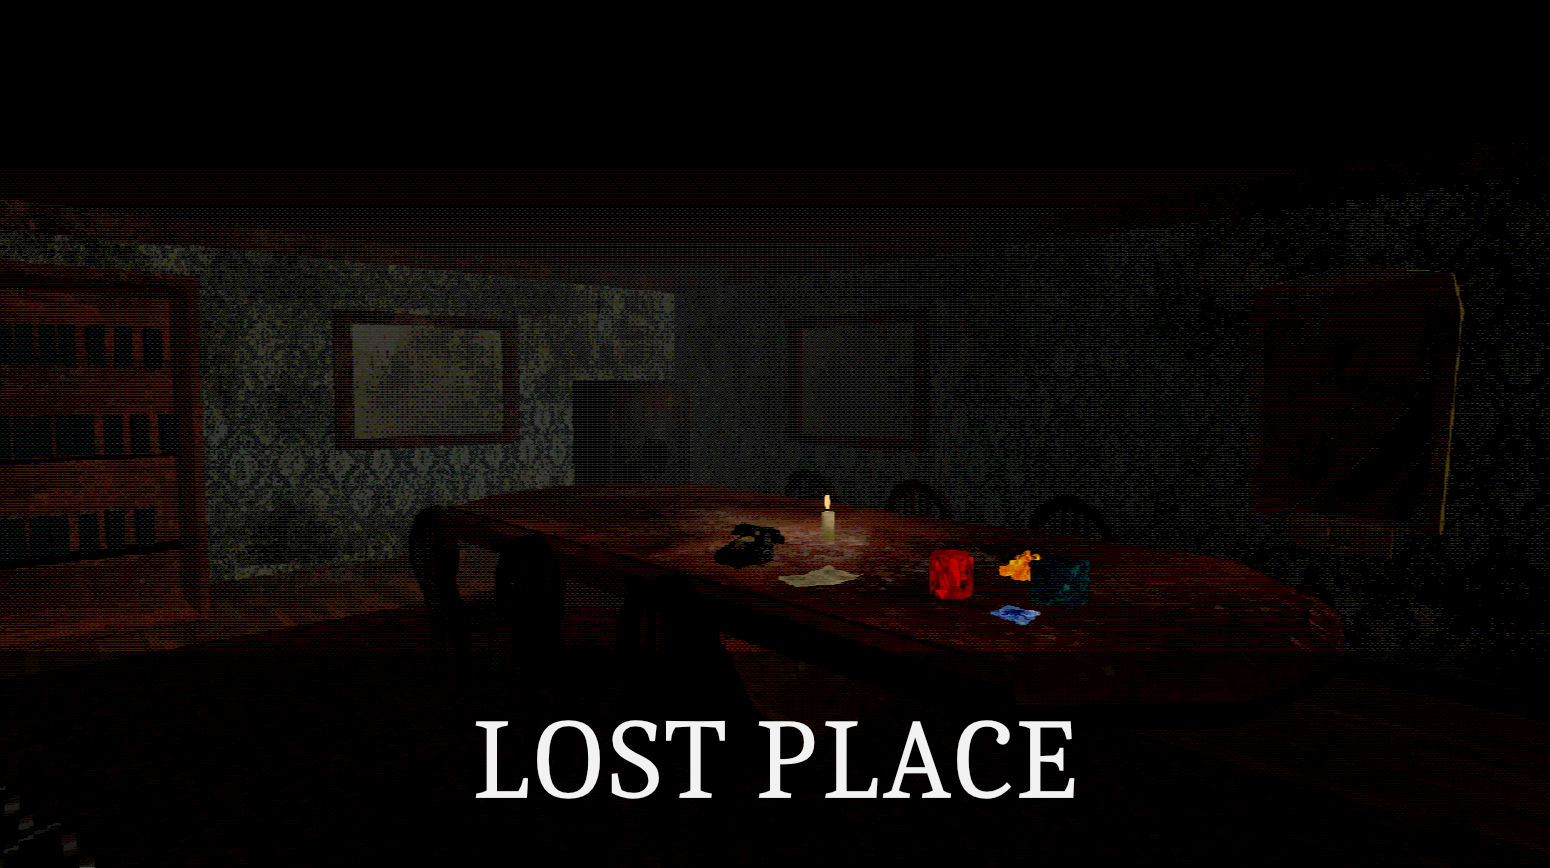 LostPlace